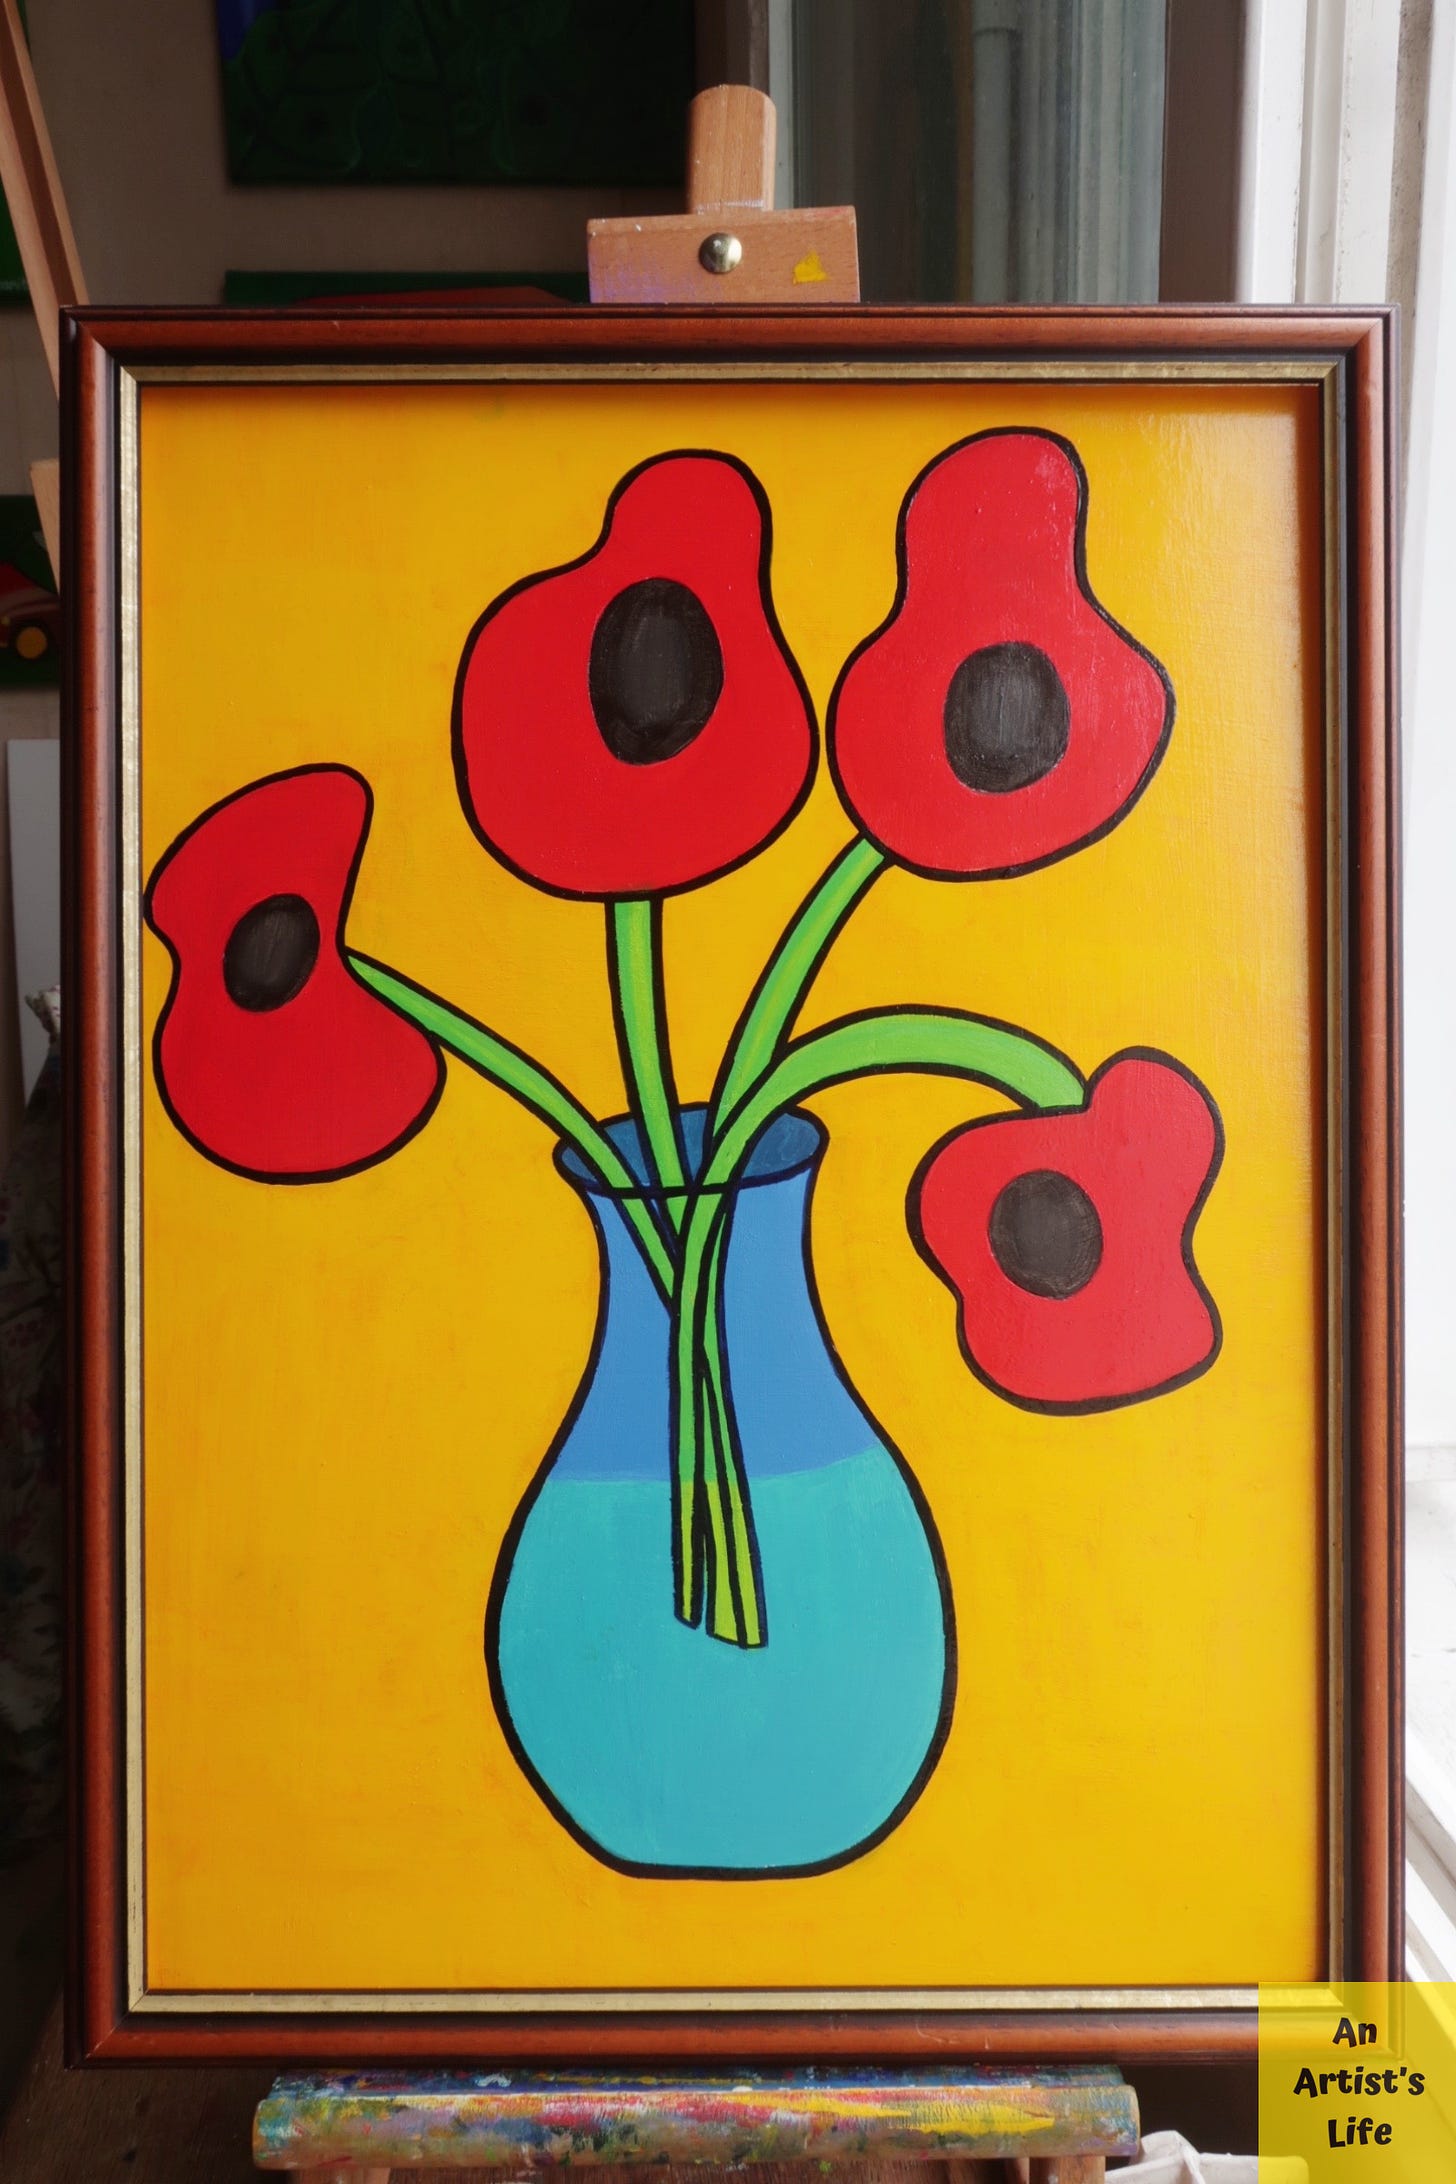 A wooden framed oil painting of four poppies in a blue vase on a yellow background